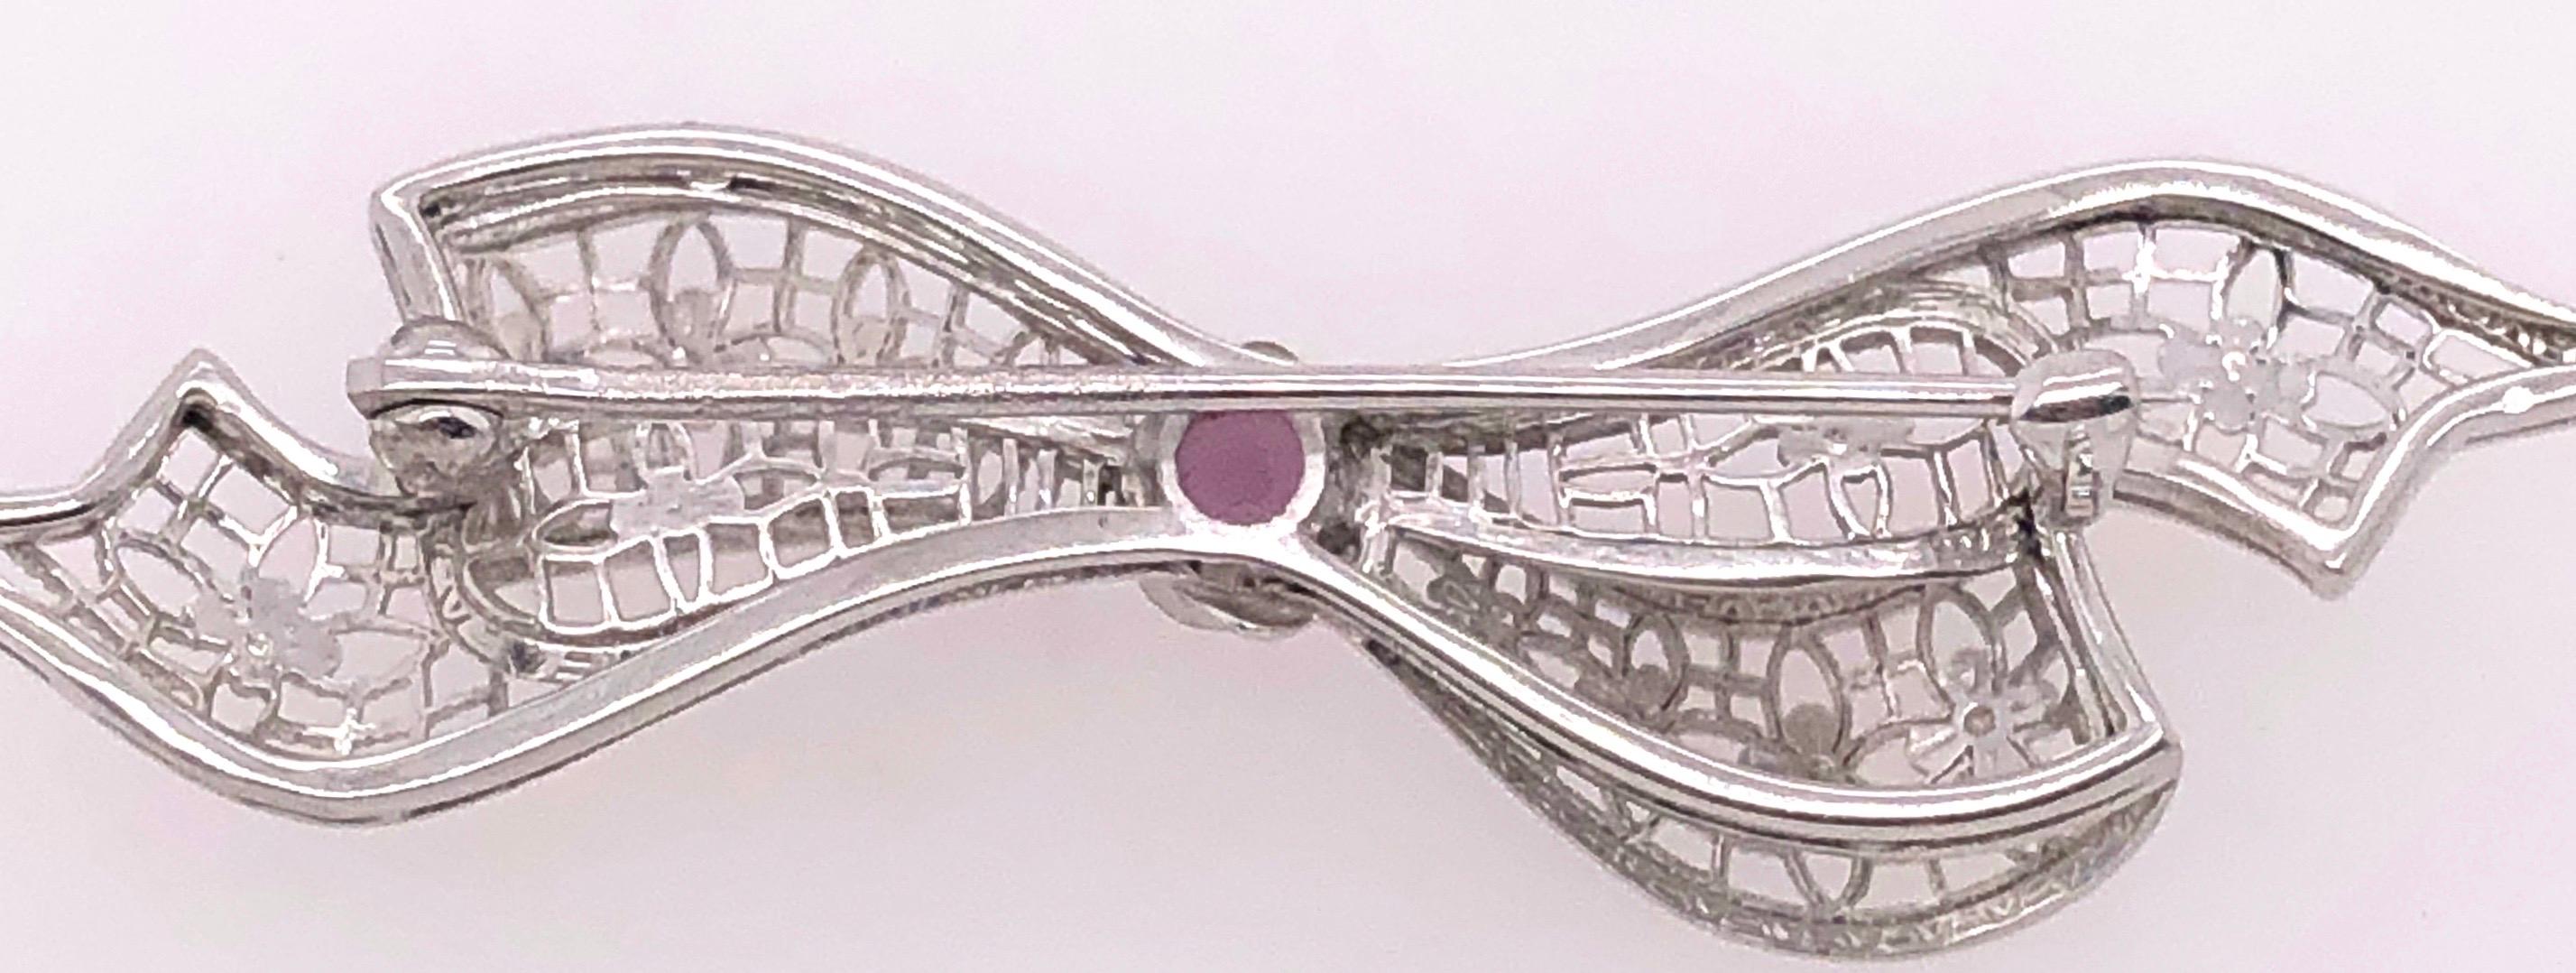 14 Karat White Gold Brooch Filigree Bow Design With Amethyst Center Stone Pin.
3.30 grams total weight.